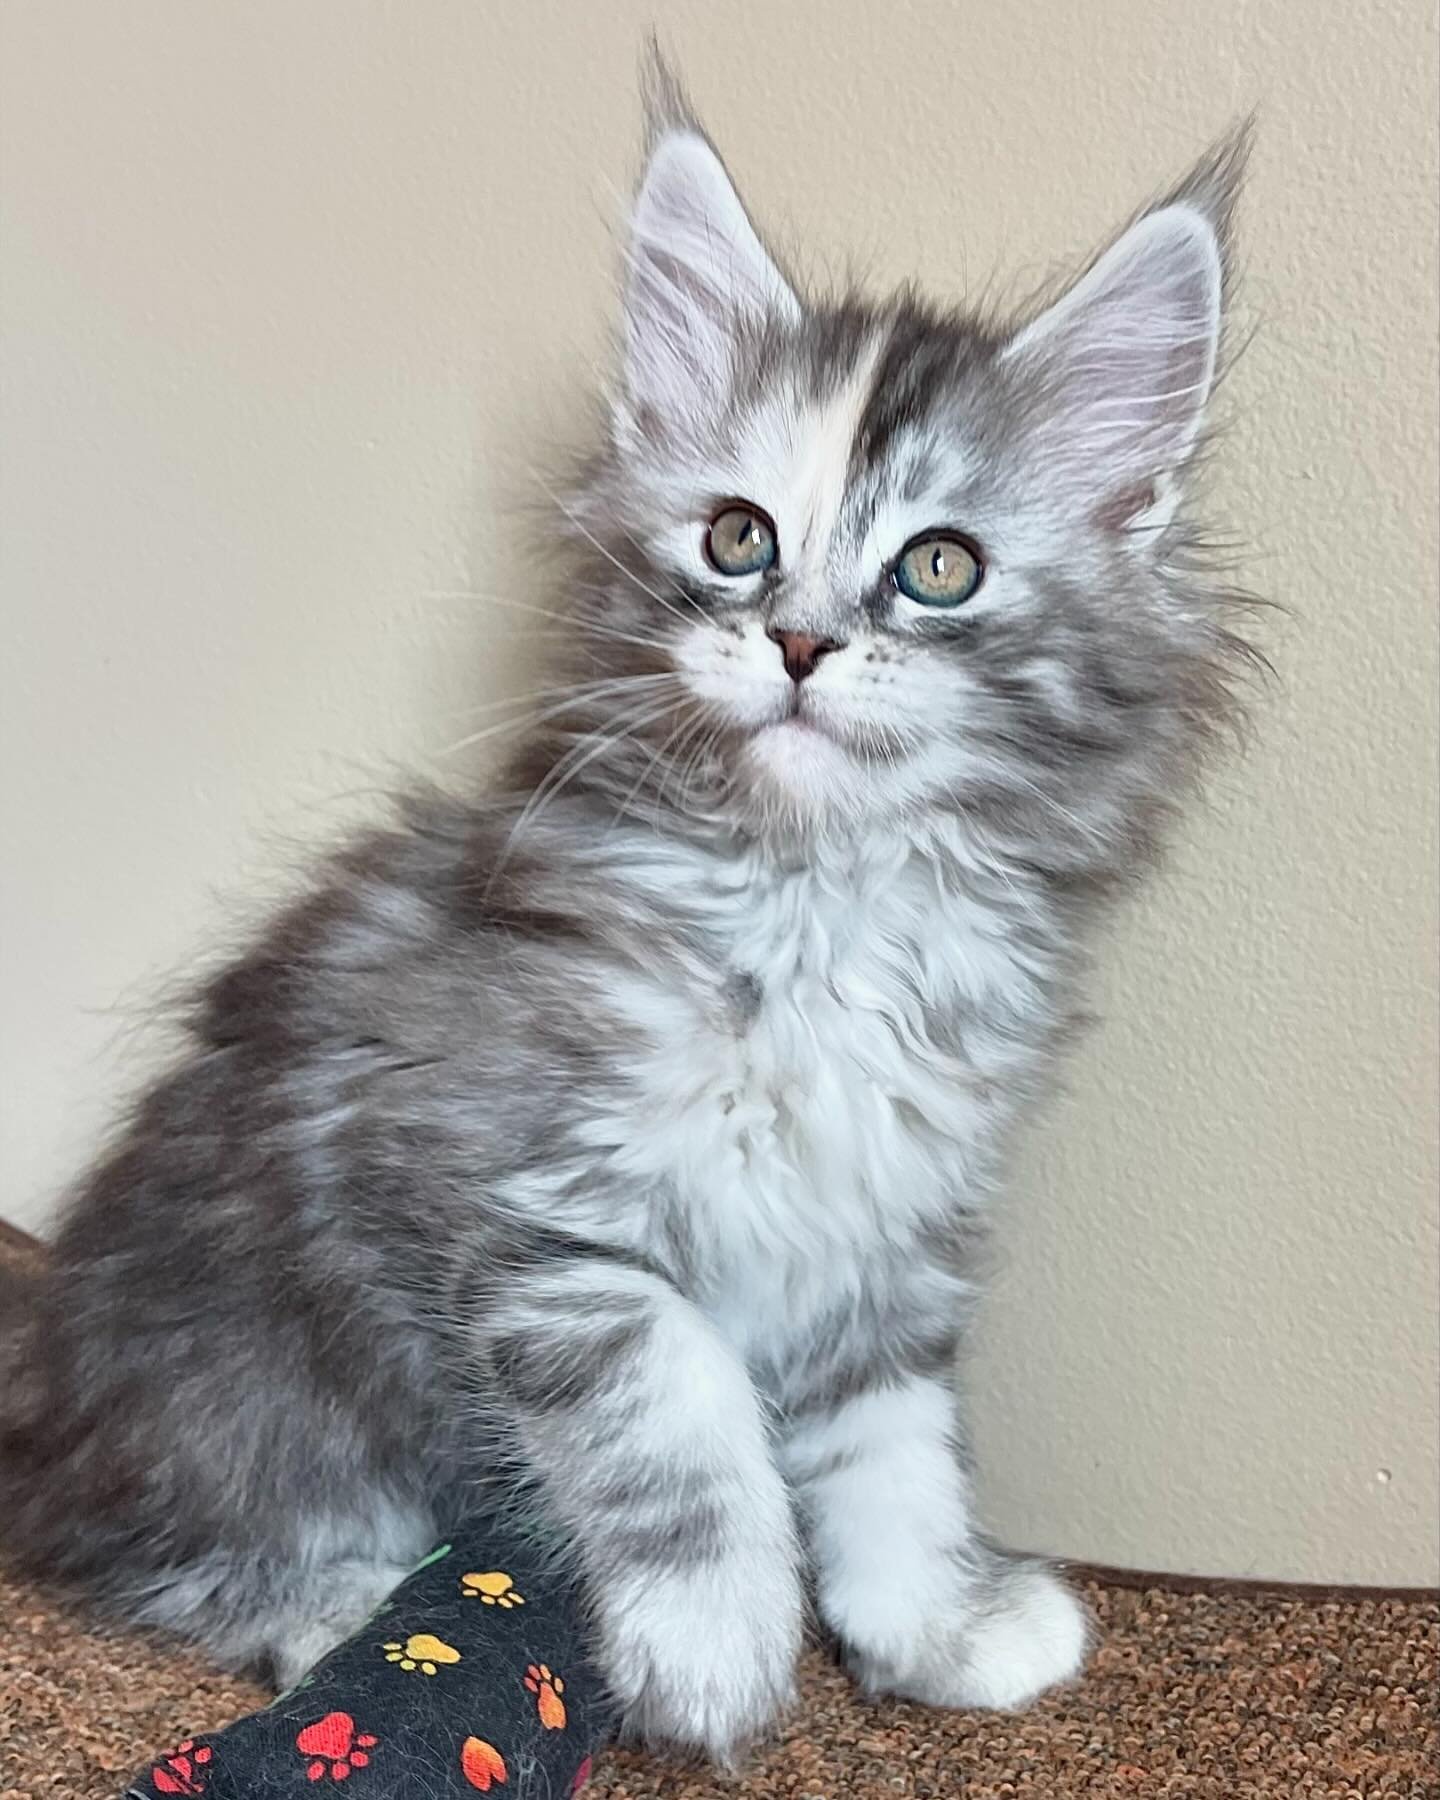 Happy Wednesday from Miss Astra 🧡🩶
&bull;The Great Norseman Litter&bull;

#mainecoon #mainecoons #mainecooncat #mainecoonlovers #bigcats #largecat #kitten #kittens #kittensofinstagram #mainecoonkitten #cat #catlover #catlife #litter